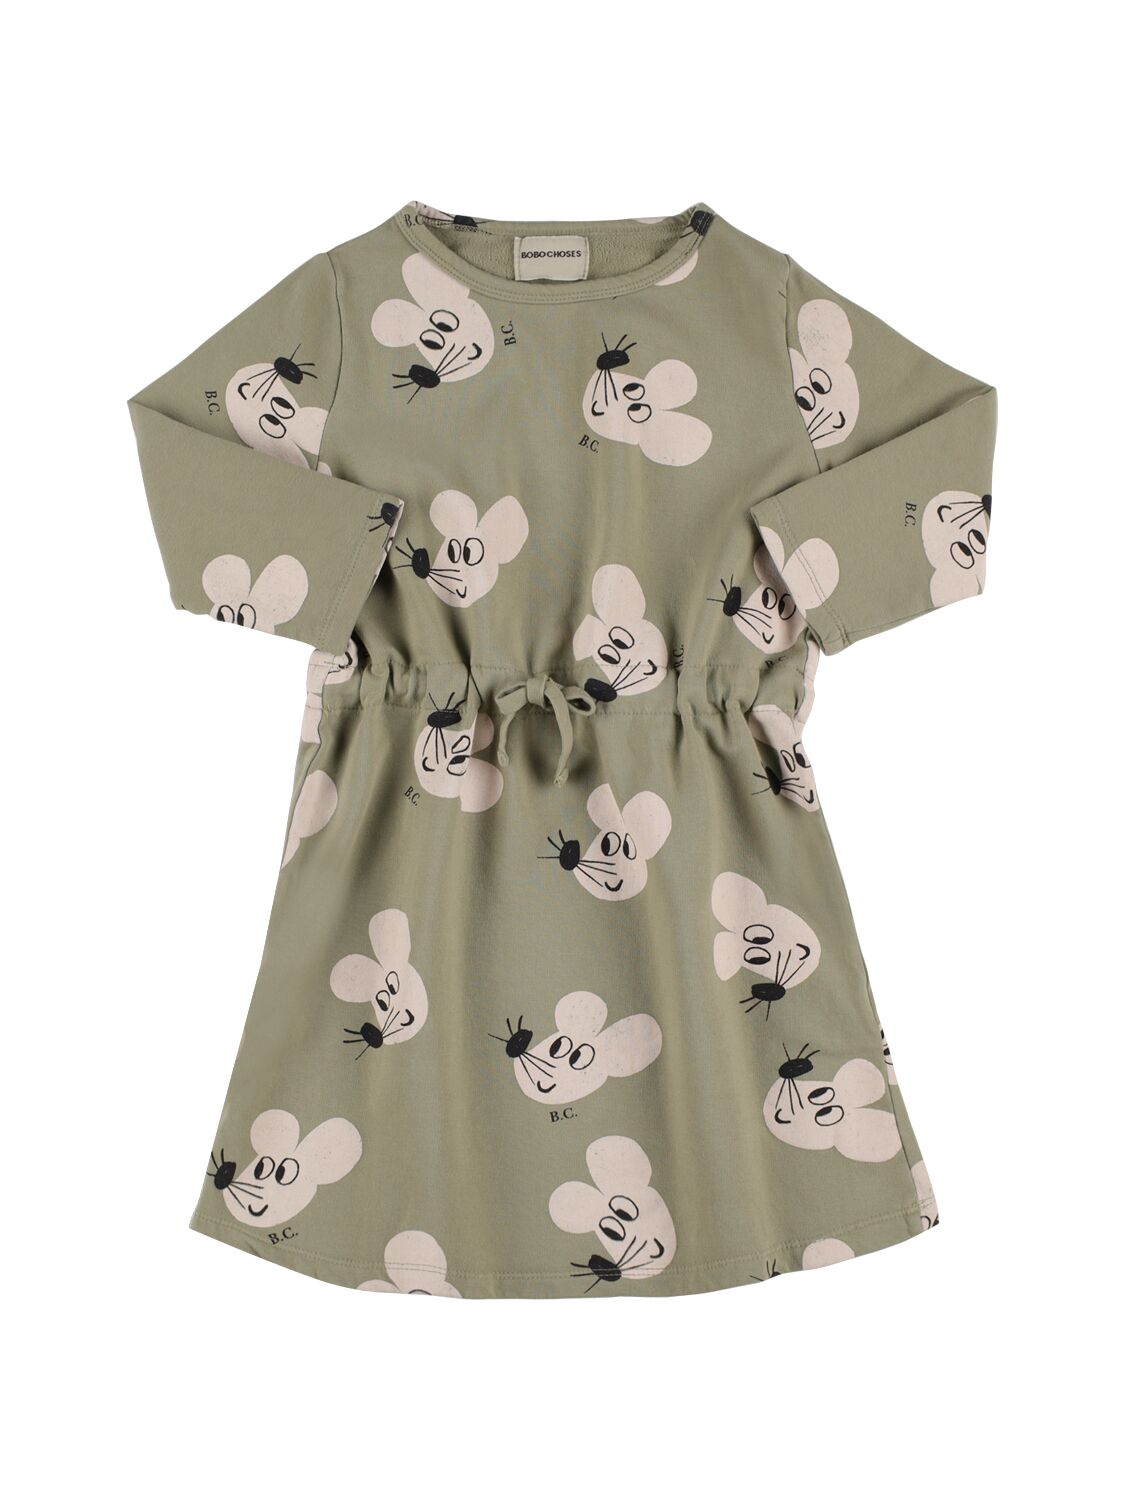 Bobo Choses Kids' Green Dress For Girl With Mice Print